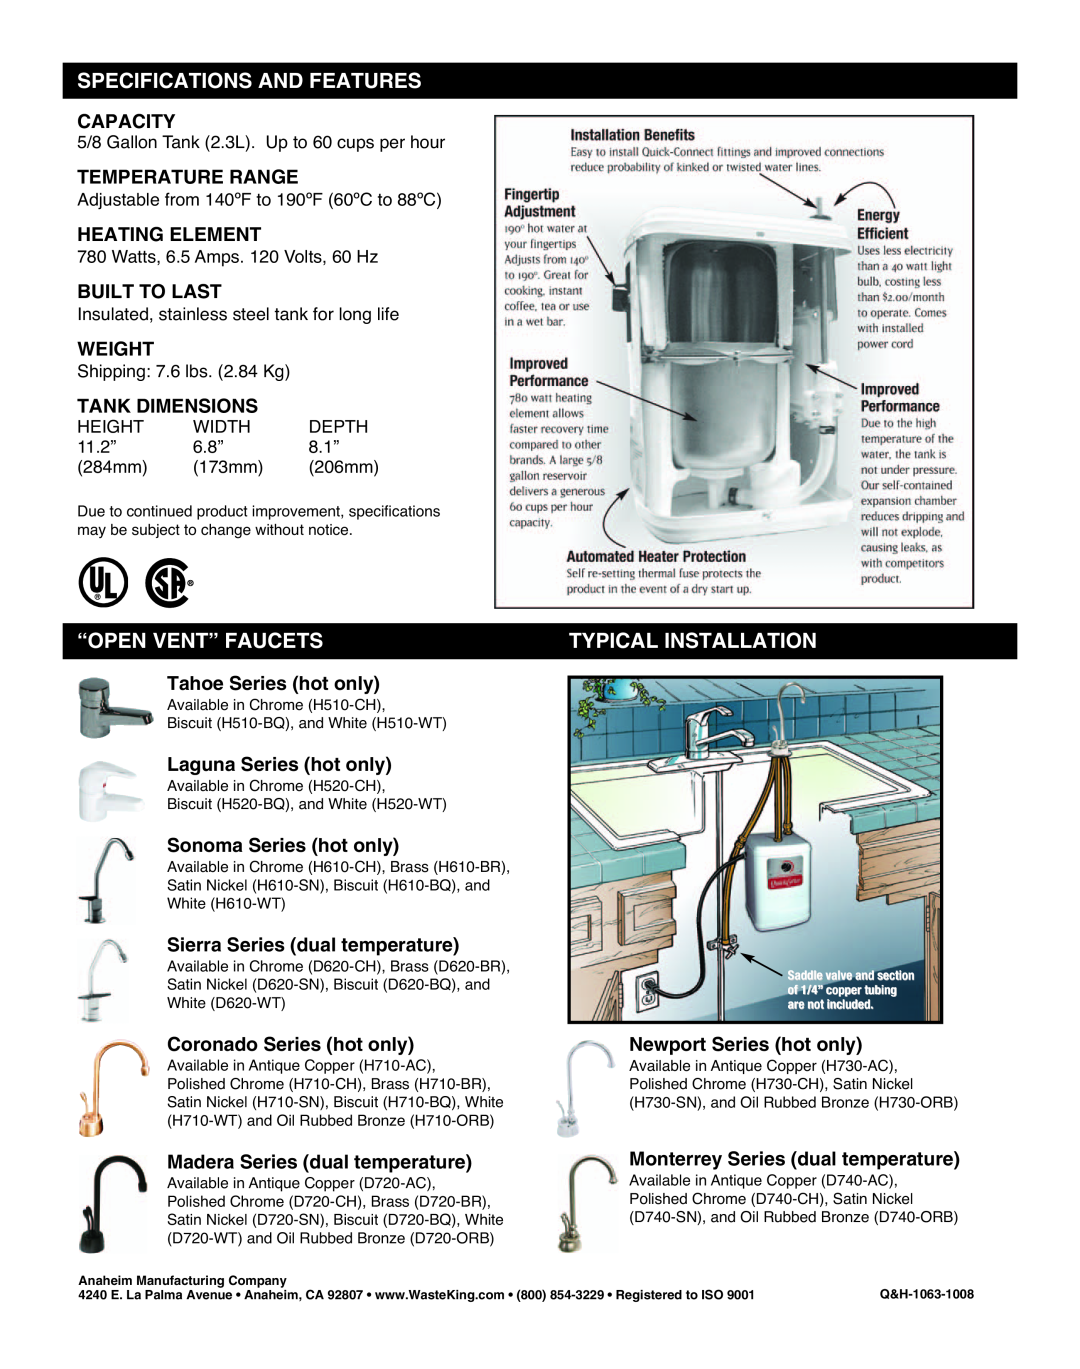 Waste King Hot Water Dispenser Specifications And Features, “Open Vent” Faucets, Typical Installation, 284mm 173mm 206mm 